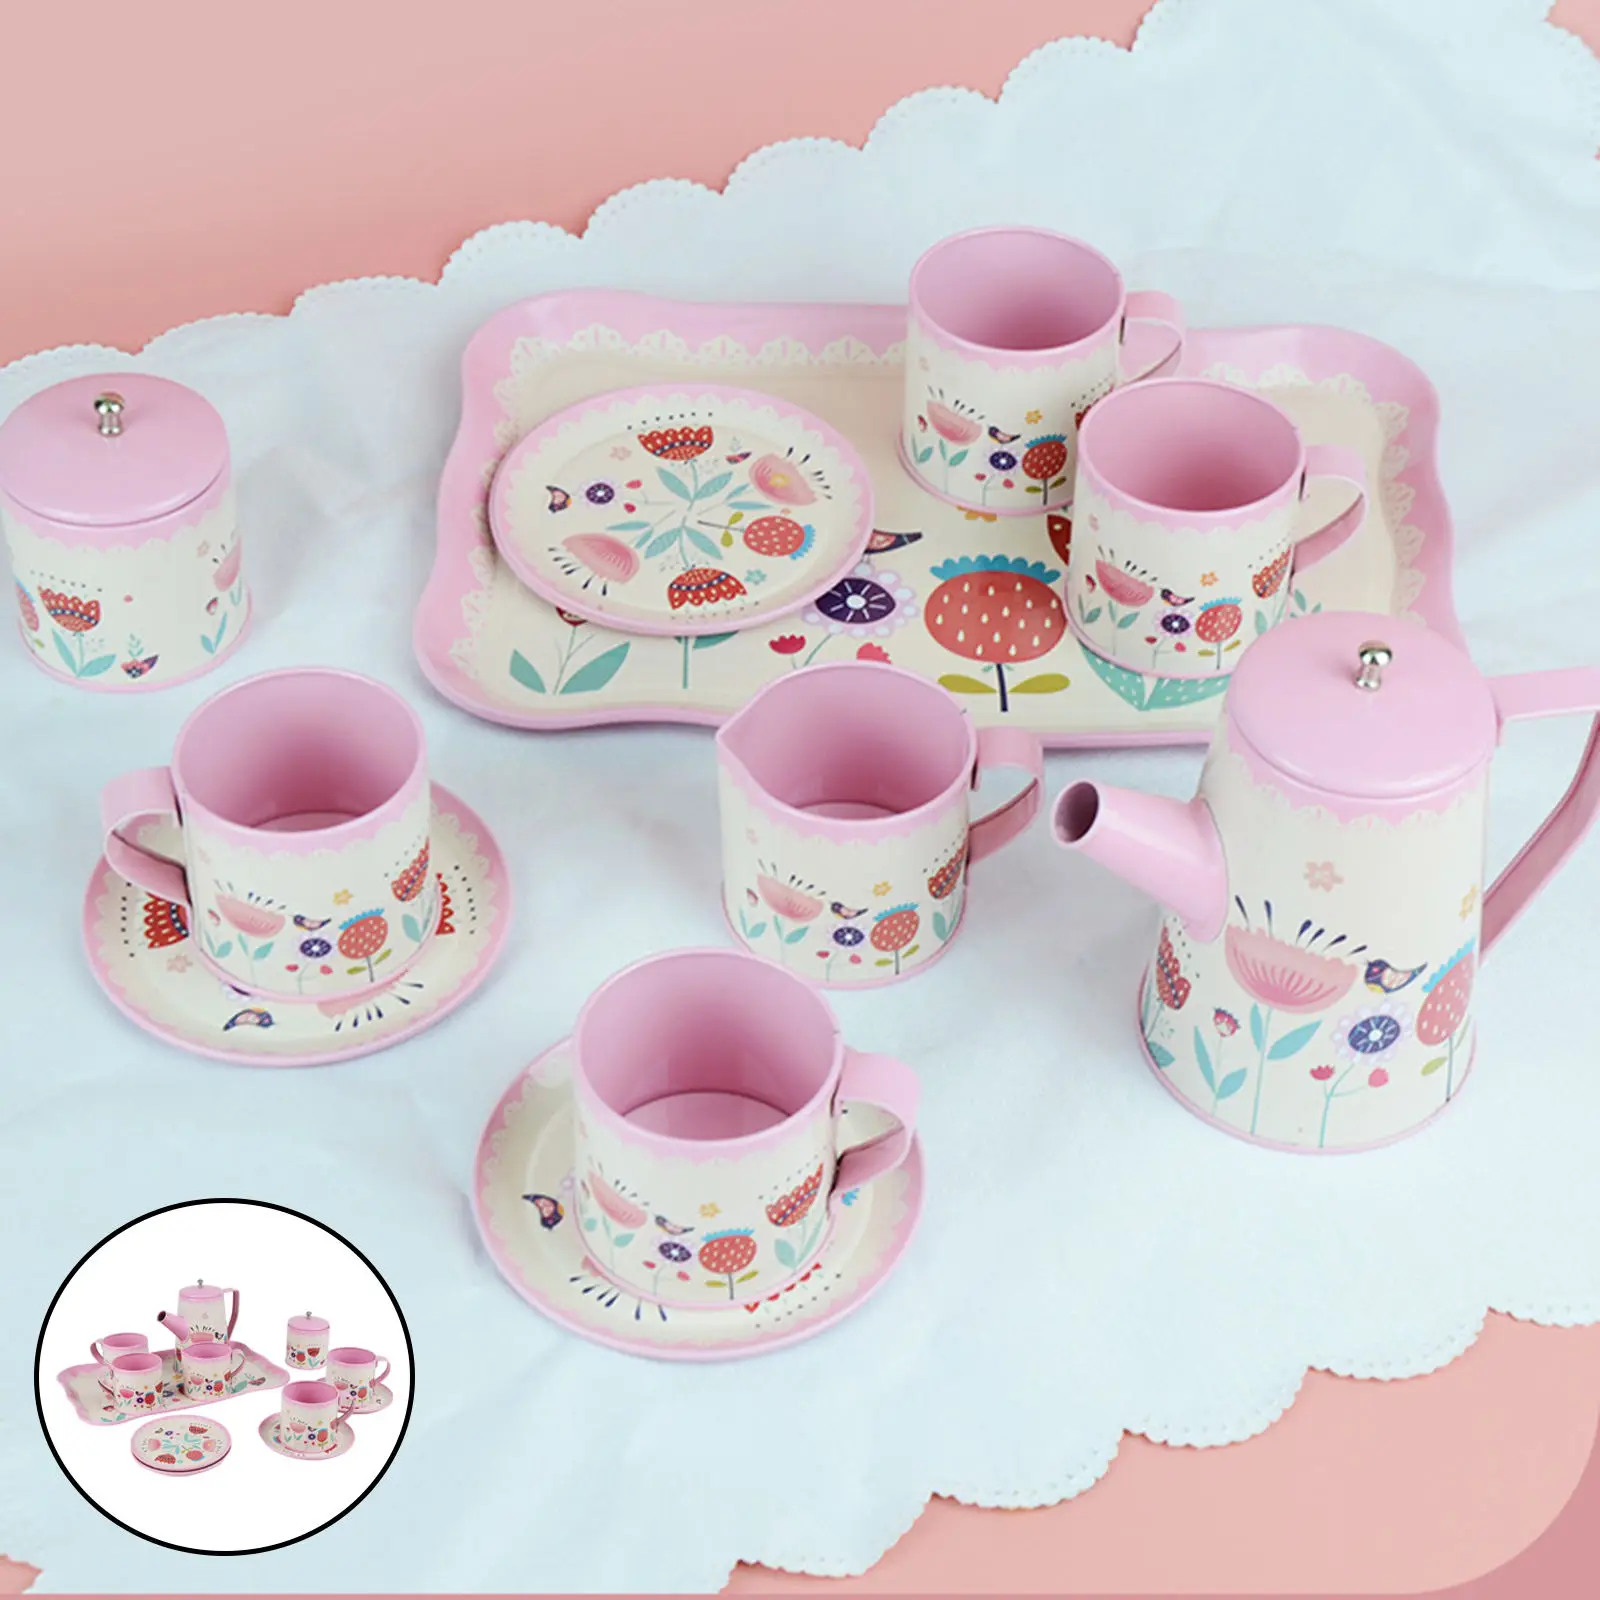 12x Kids Tin Tea Set Kitchen Toys Pretend Play Metal Role Play Simulation Teapot Teacup for Children Girls Holiday Gifts